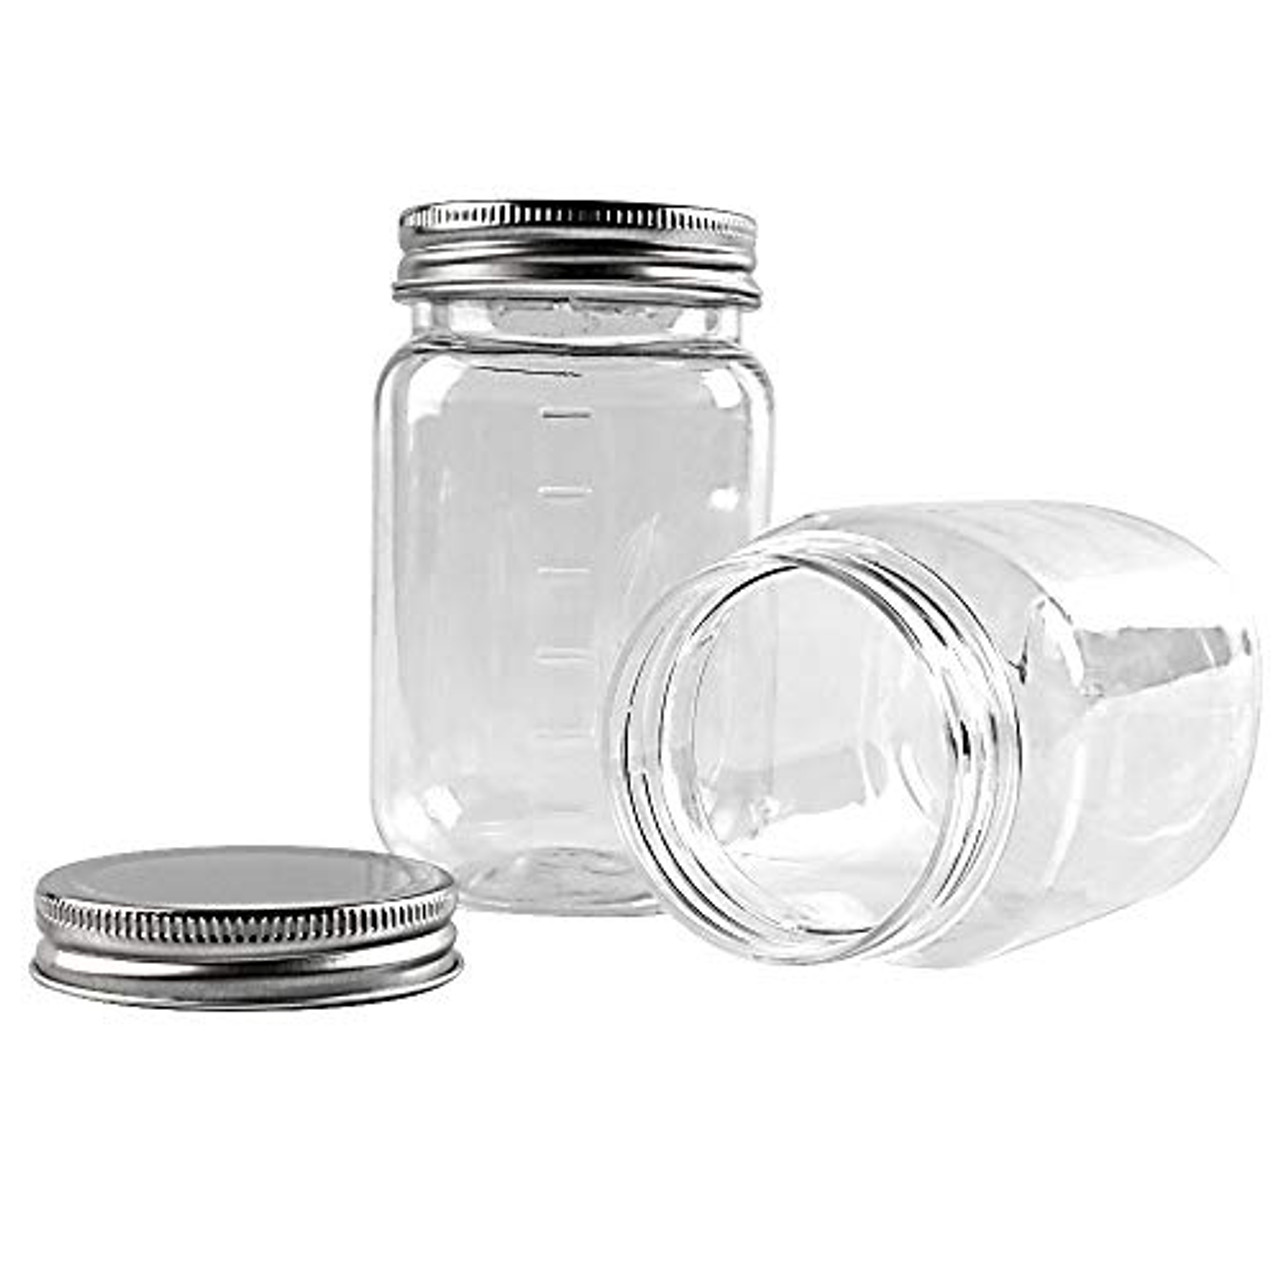 16 Oz Clear Plastic Mason Jars With Ribbed Liner Screw On Lids, Wide Mouth,  ECO, BPA Free, PET Plastic, Made In USA, Bulk Storage Containers, 6 Pack  (16 Ounces)